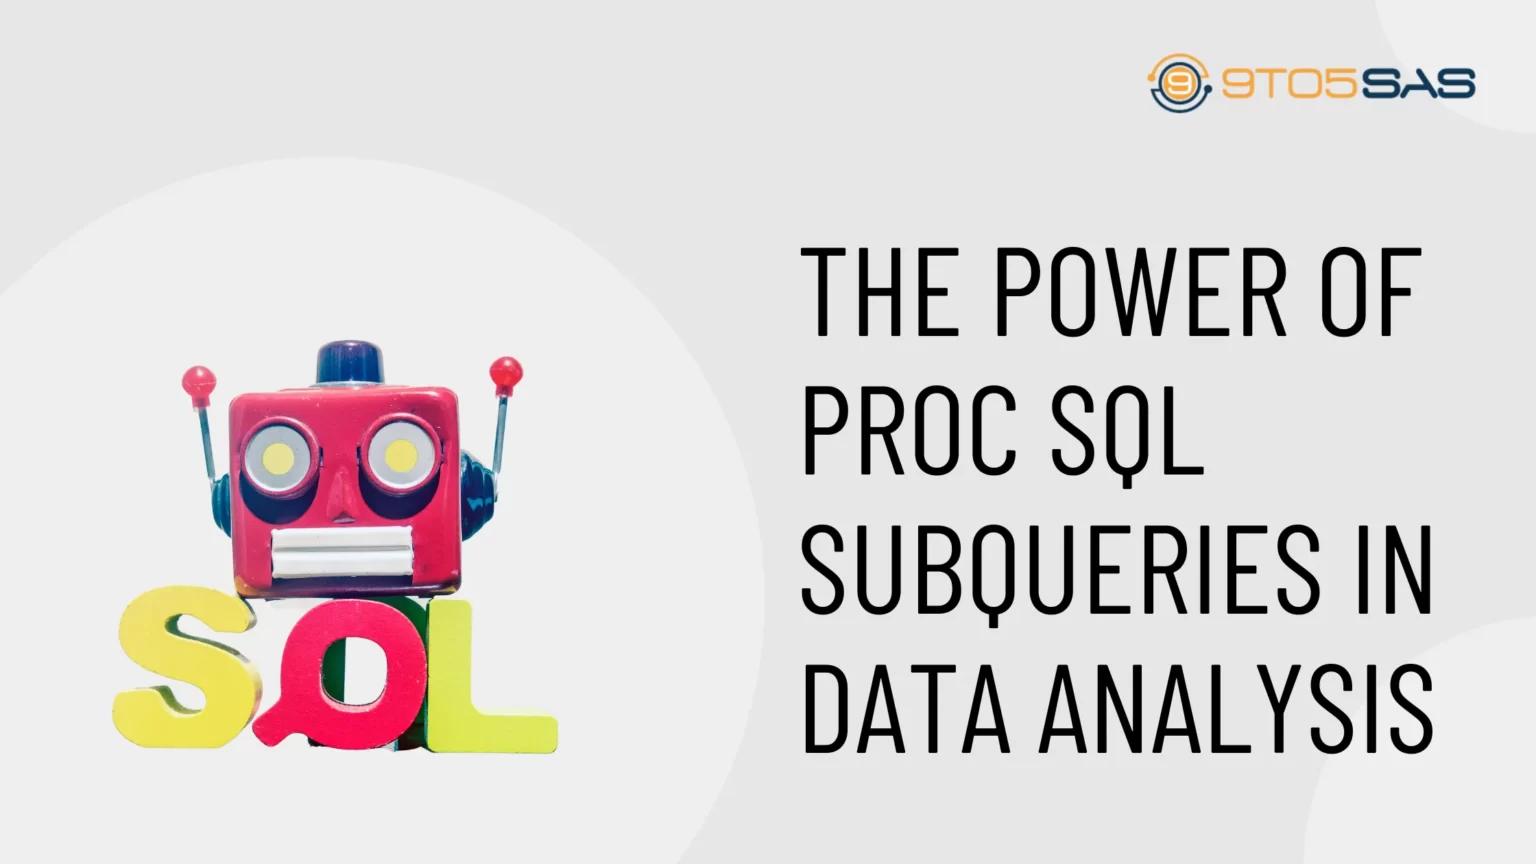 The Power of Proc SQL Subqueries in Data Analysis